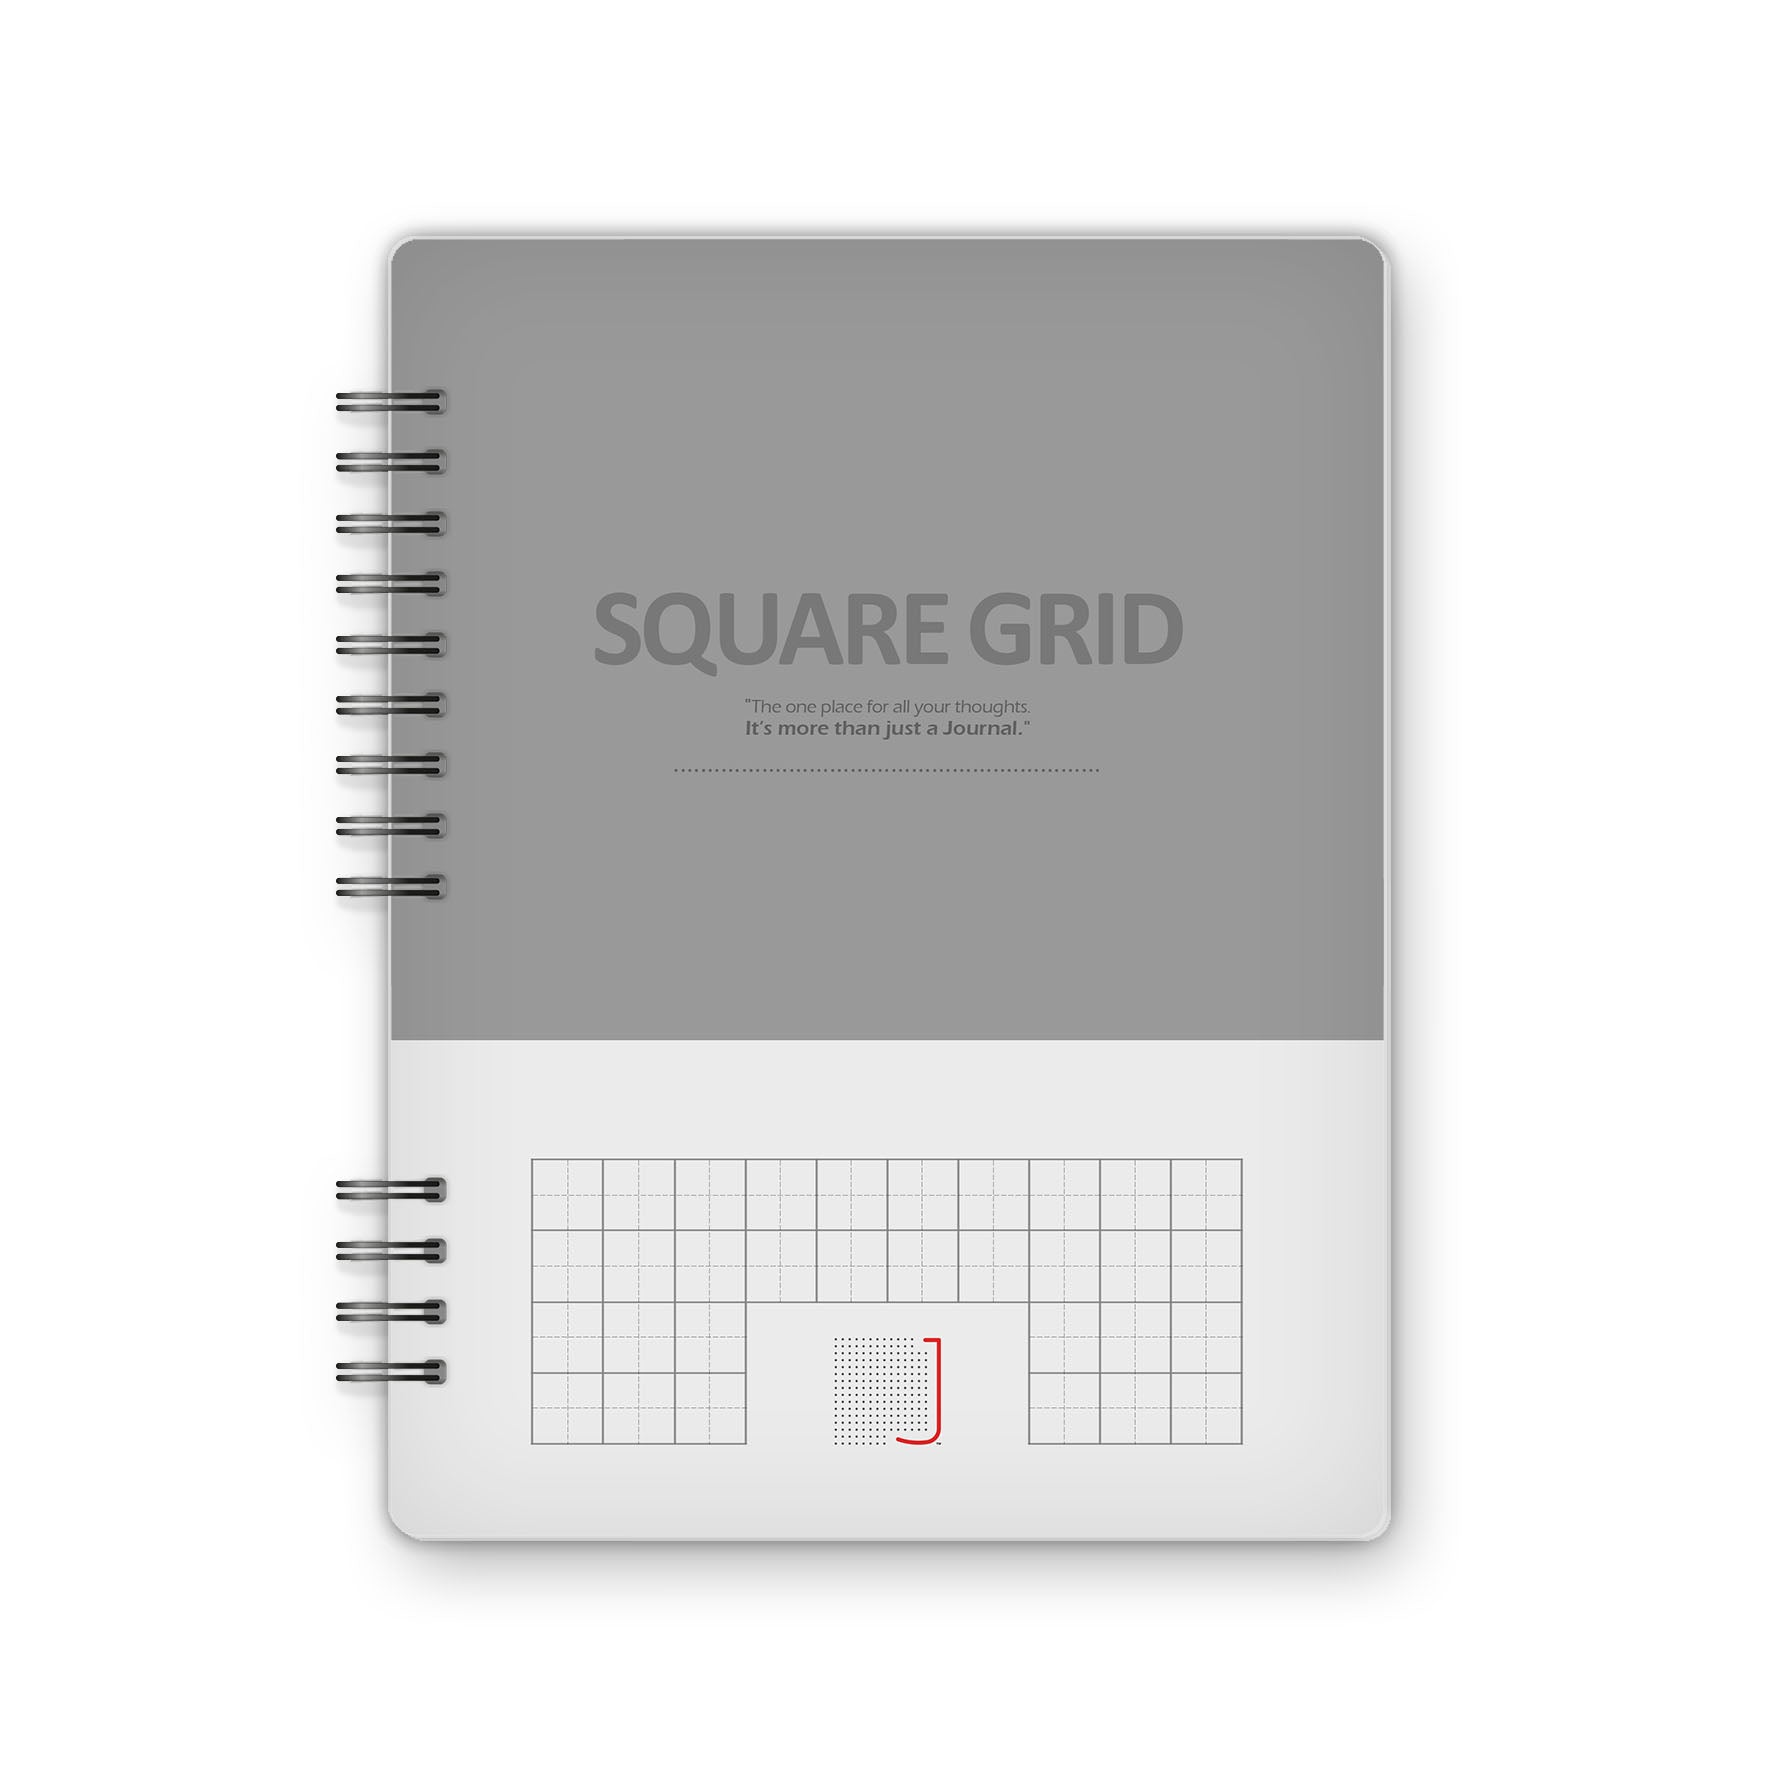 Square Grid - 18X14 cm - 75 Sheets | Grey - from Journals